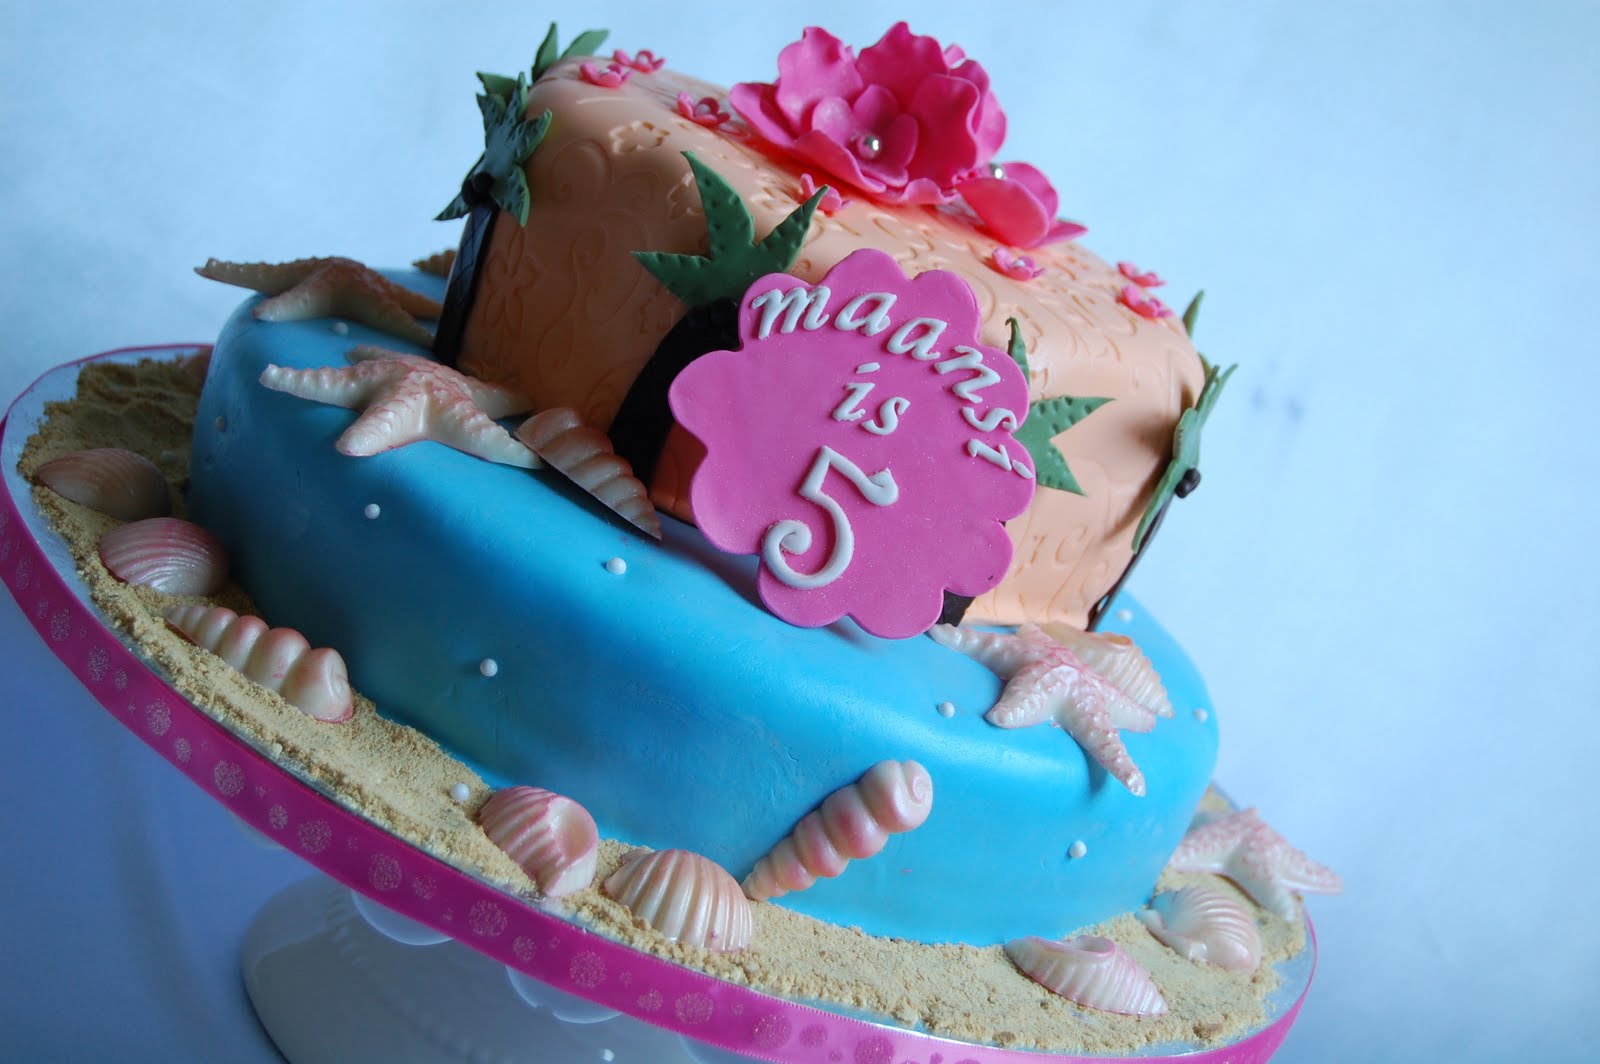 CUSTOMISED CAKES BY JEN: Tropical Cake